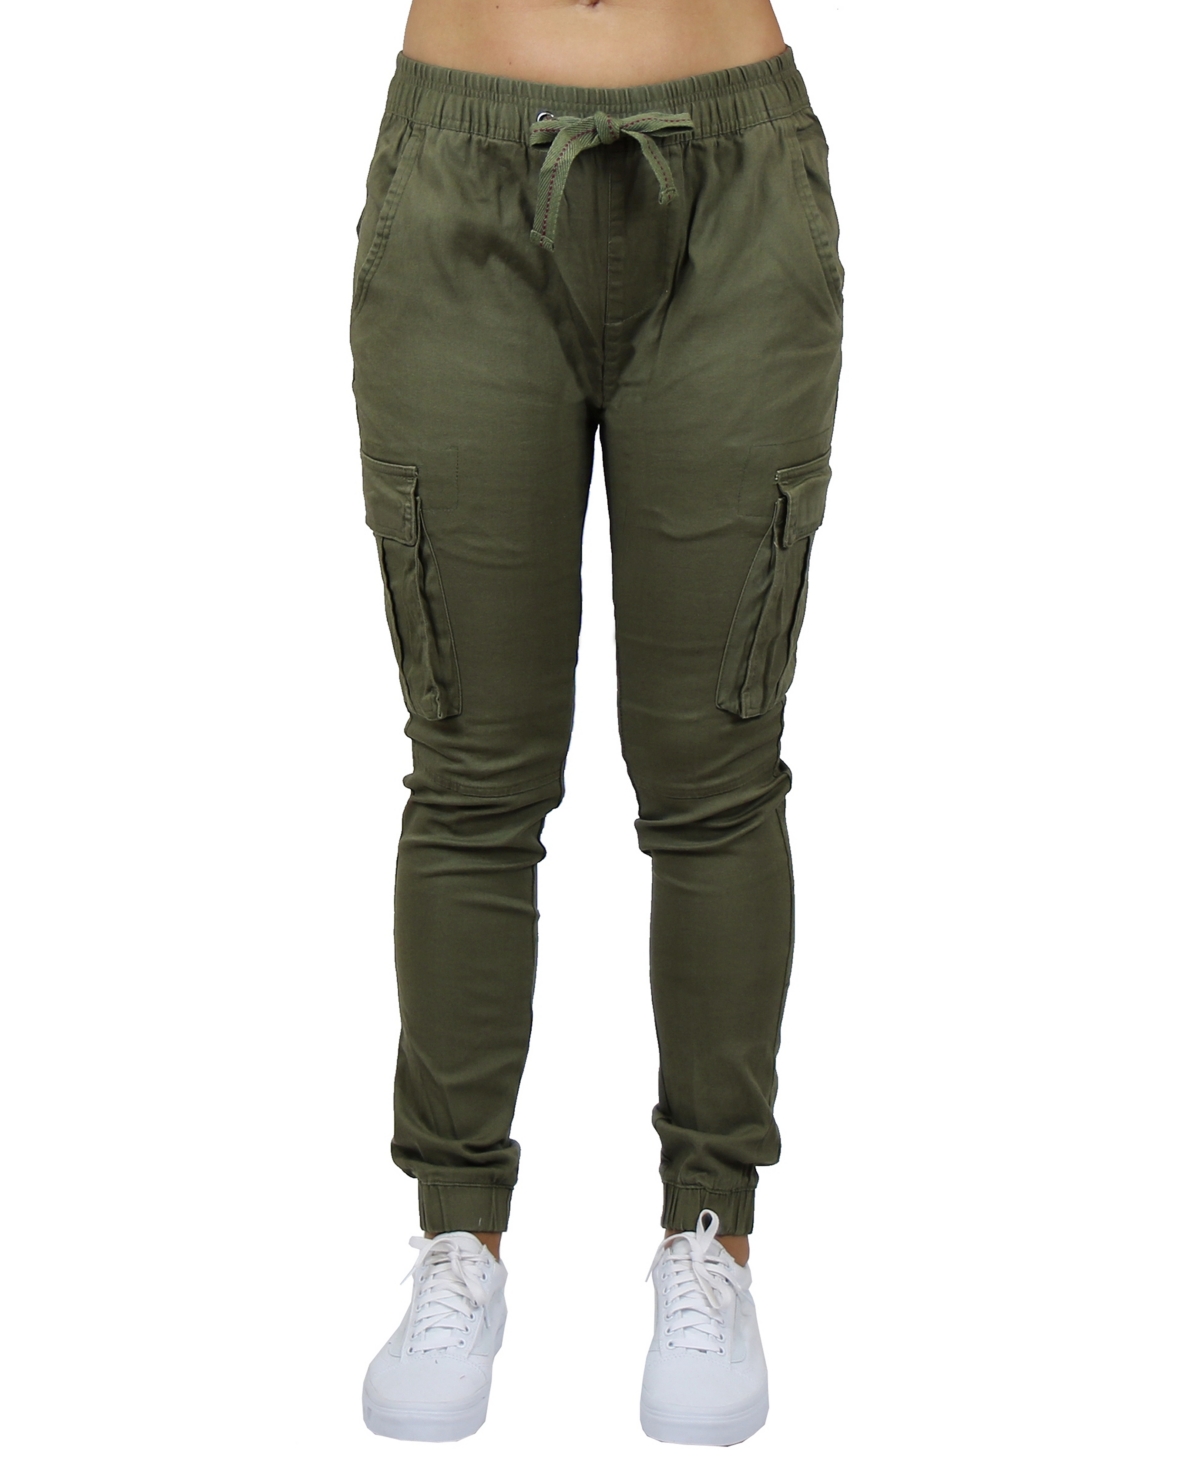 Galaxy By Harvic Women's Loose Fit Cotton Stretch Twill Cargo Joggers In Olive